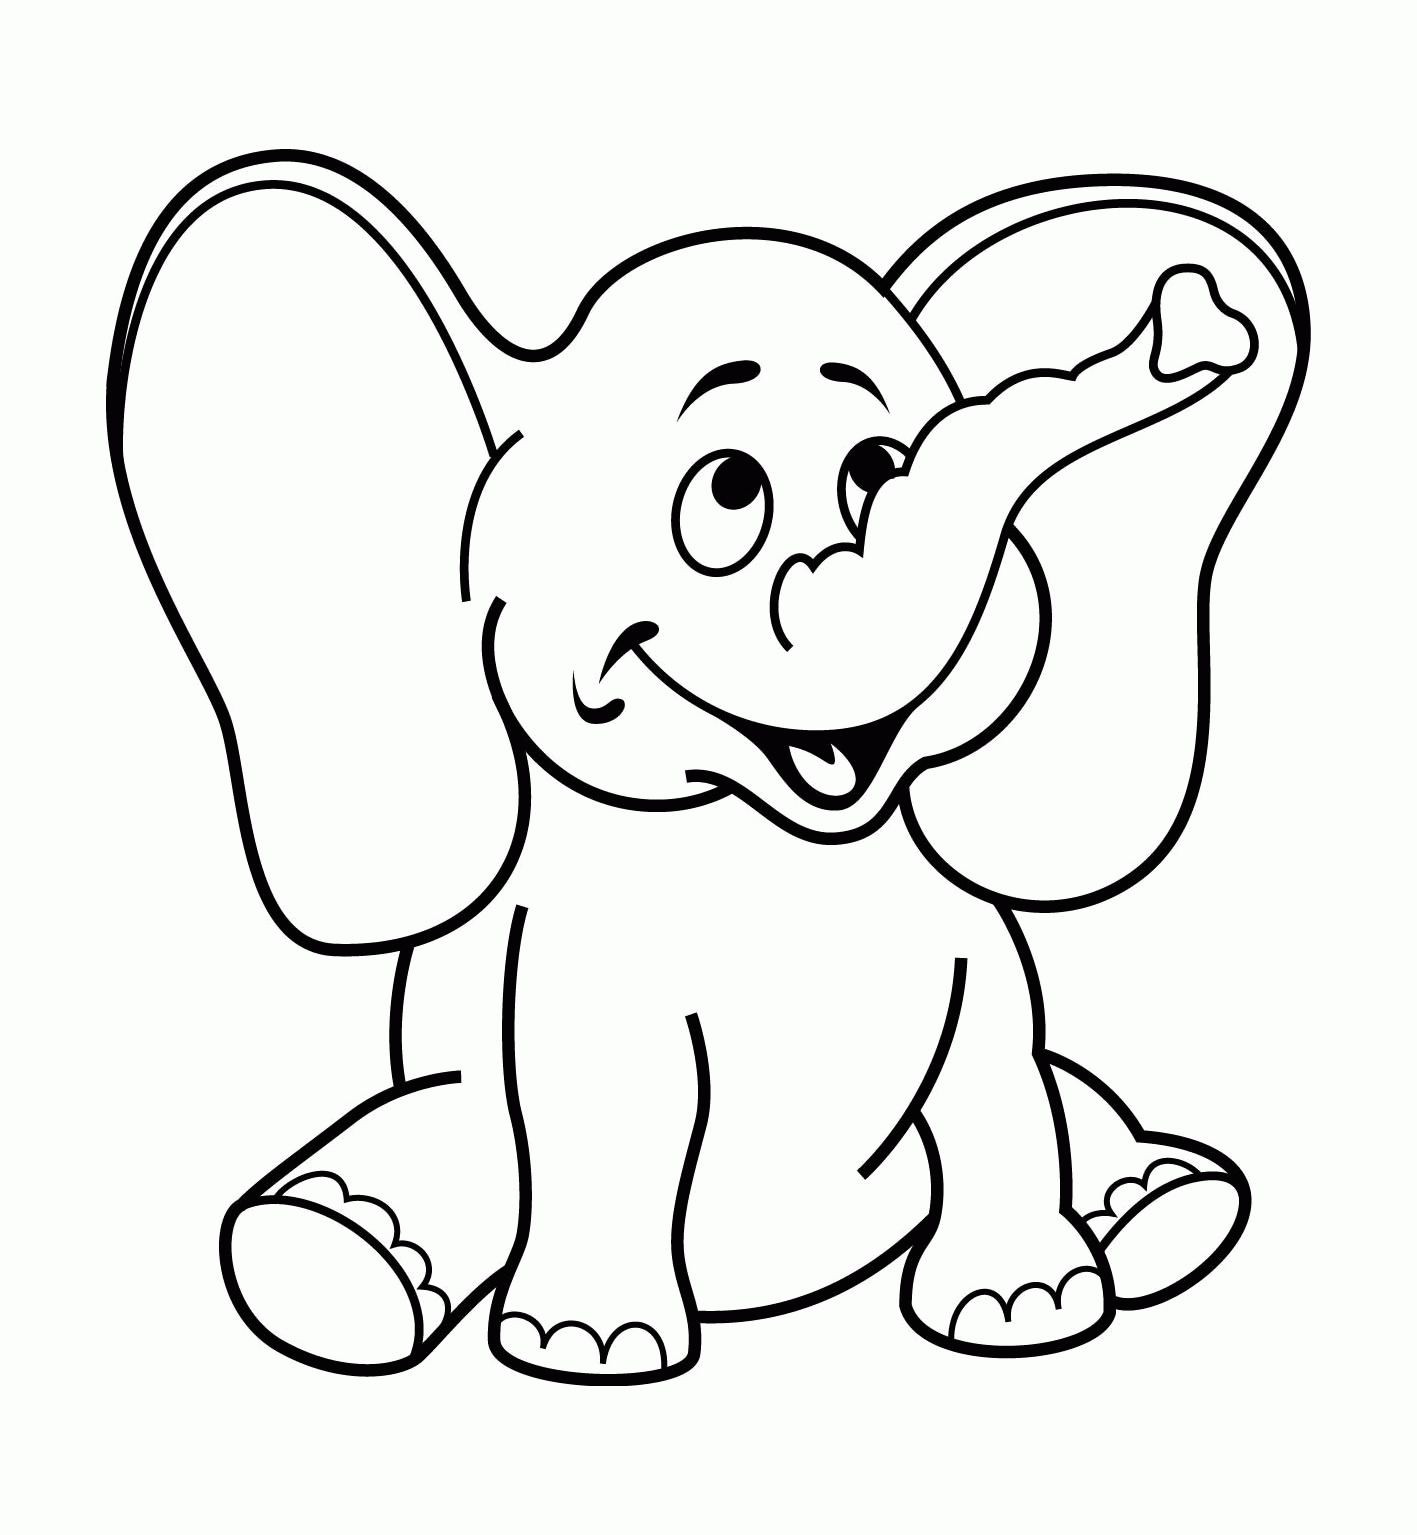 Coloring Page For 3 Years Old - Coloring Home